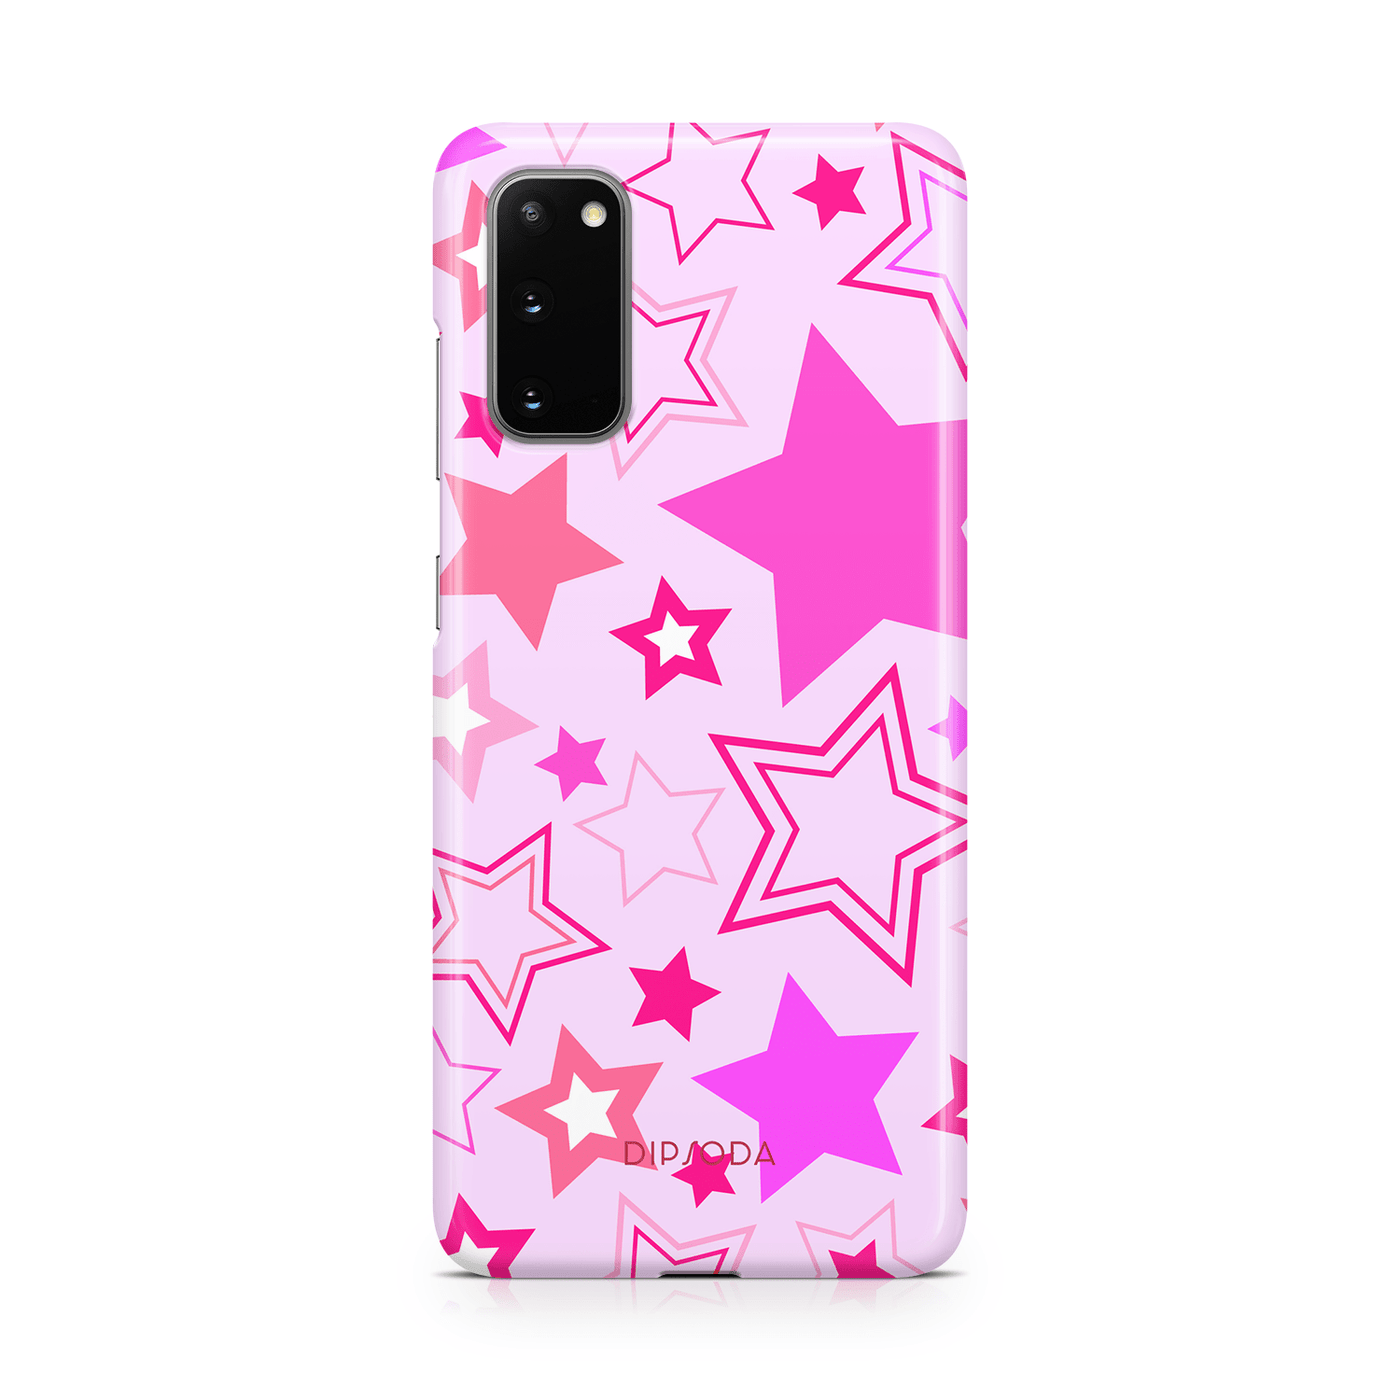 Live Your Dream Phone Case